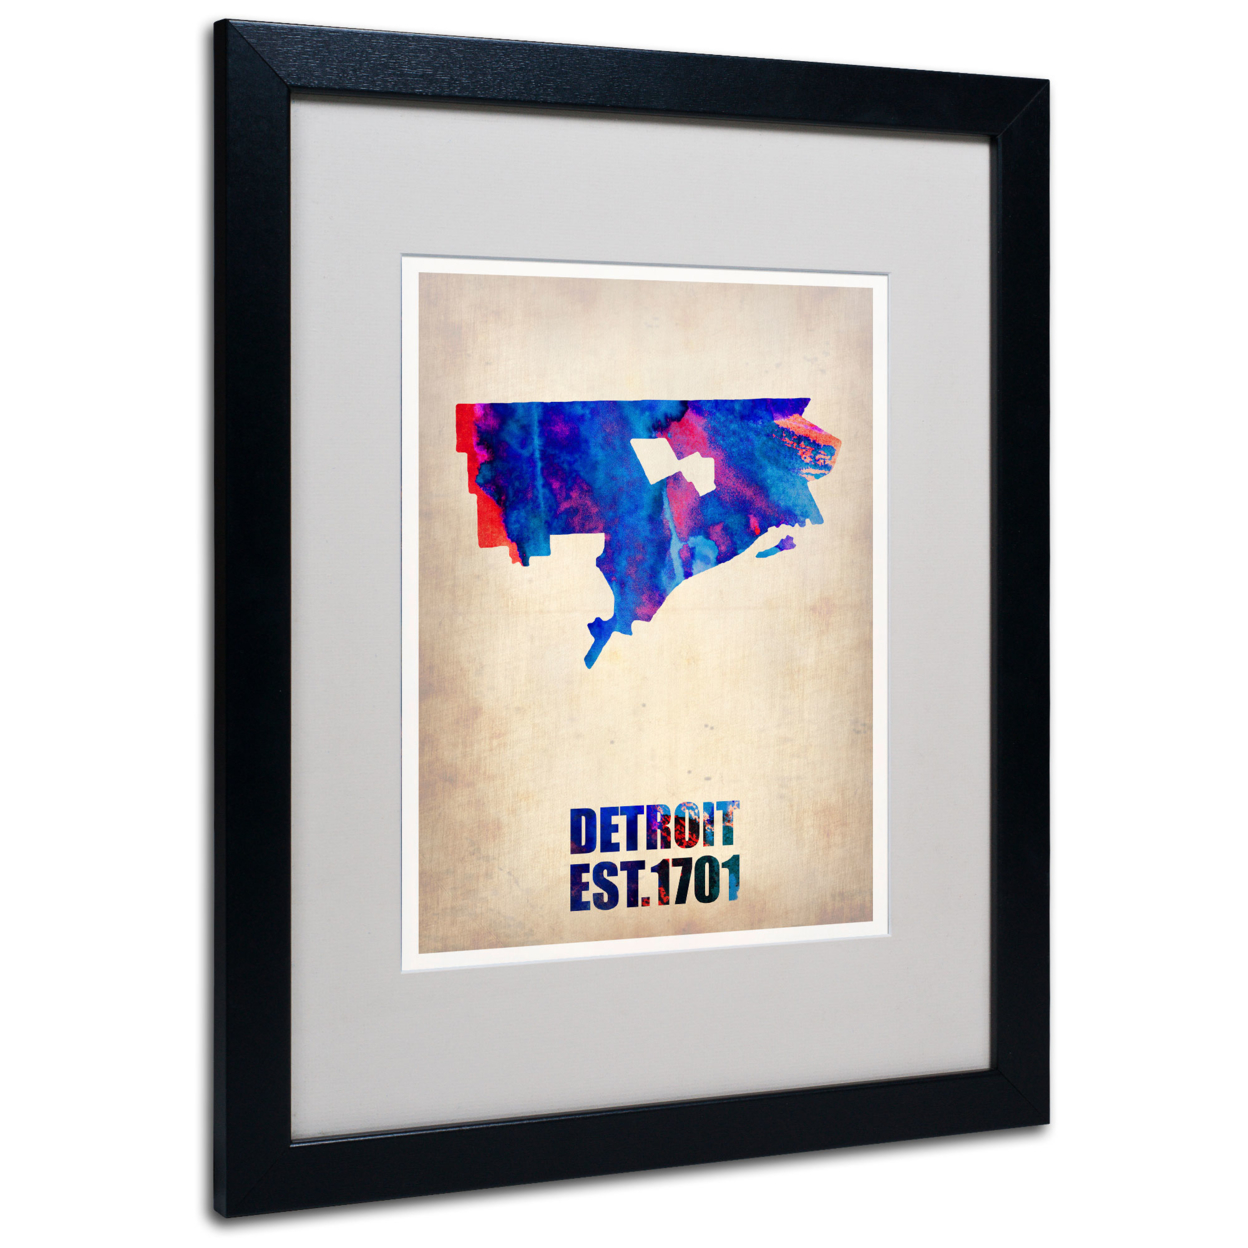 Naxart 'Detroit Watercolor Map' Black Wooden Framed Art 18 X 22 Inches